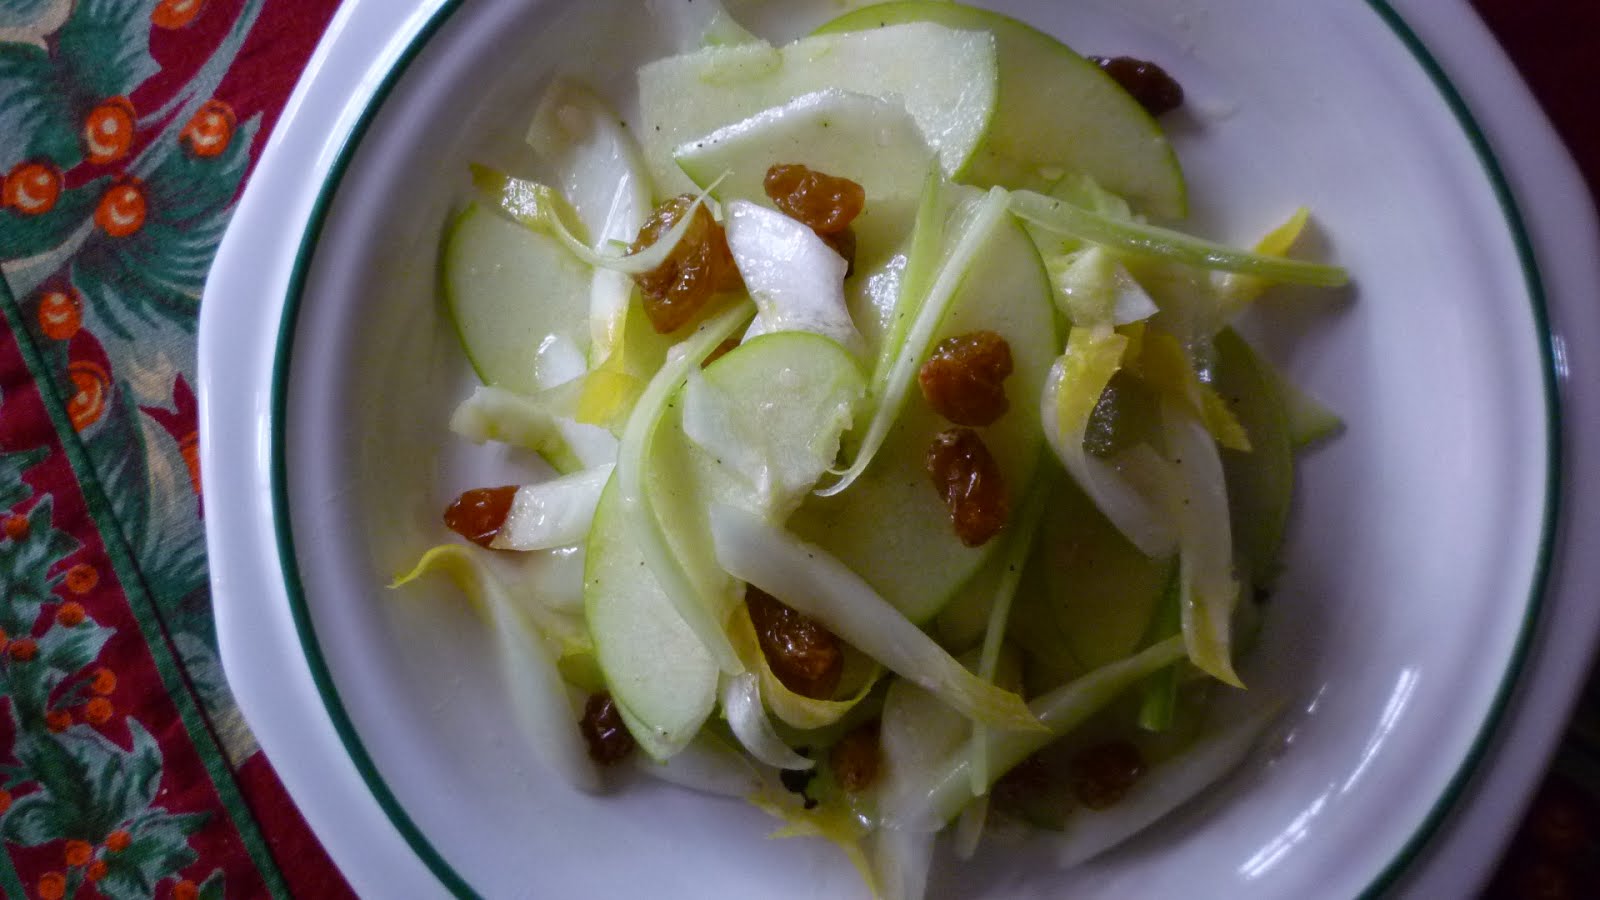 Sautéed Endive With Balsamic Butter Recipe - NYT Cooking